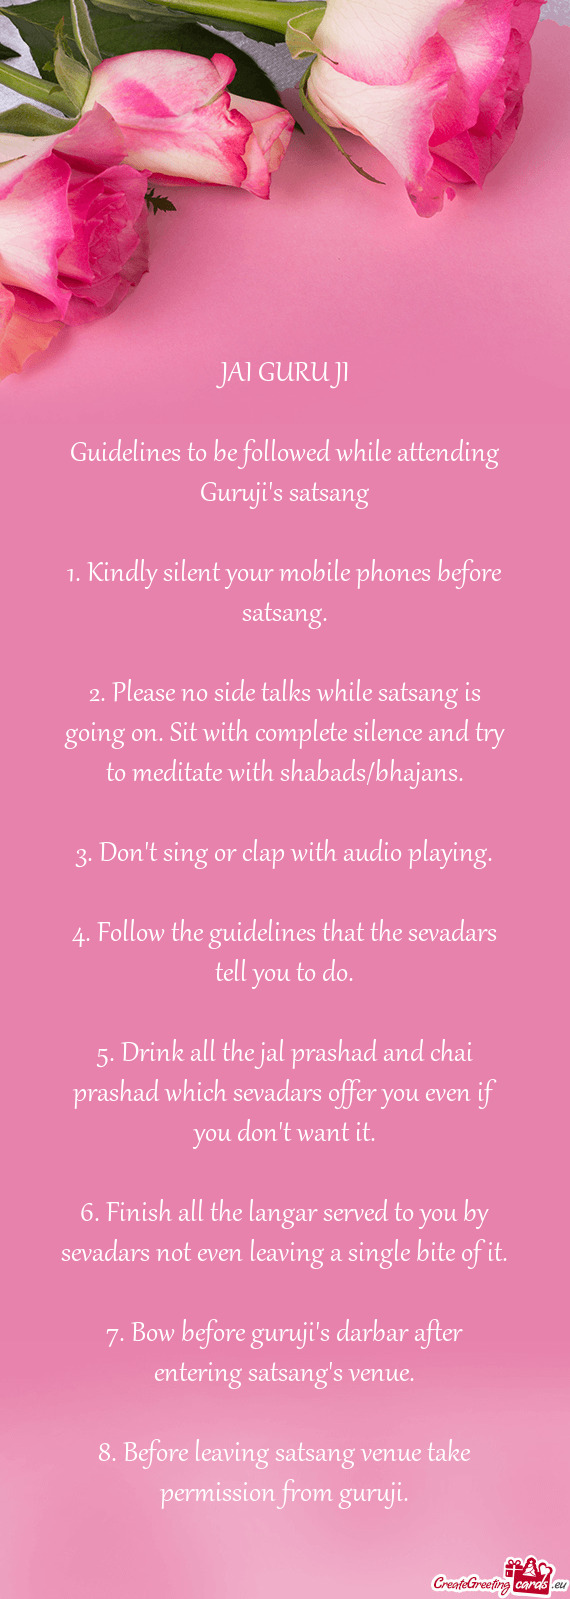 1. Kindly silent your mobile phones before satsang